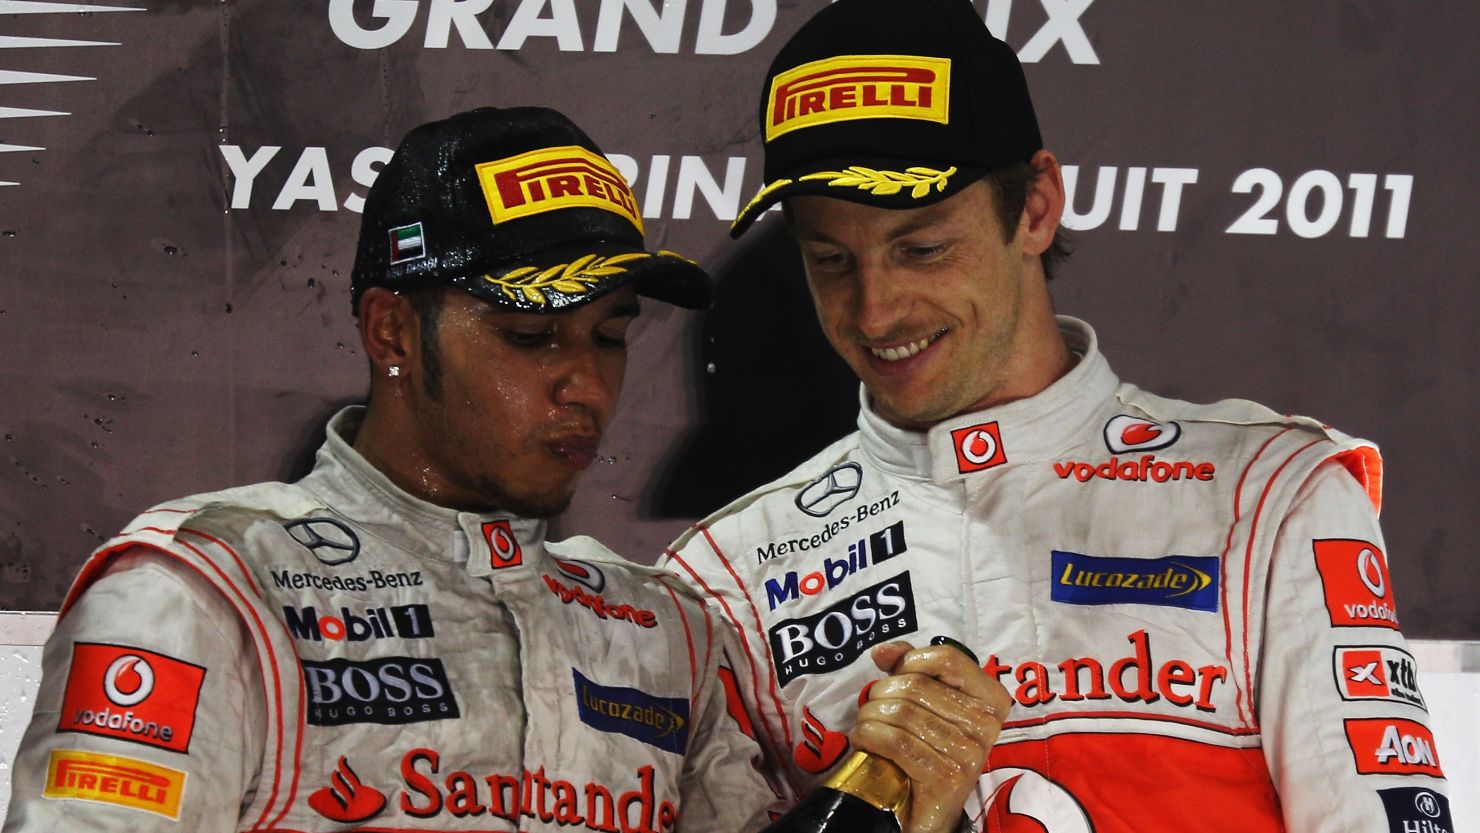 Lewis Hamilton (left) and Jenson Button have been teammates at McLaren since the start of the 2010 season.